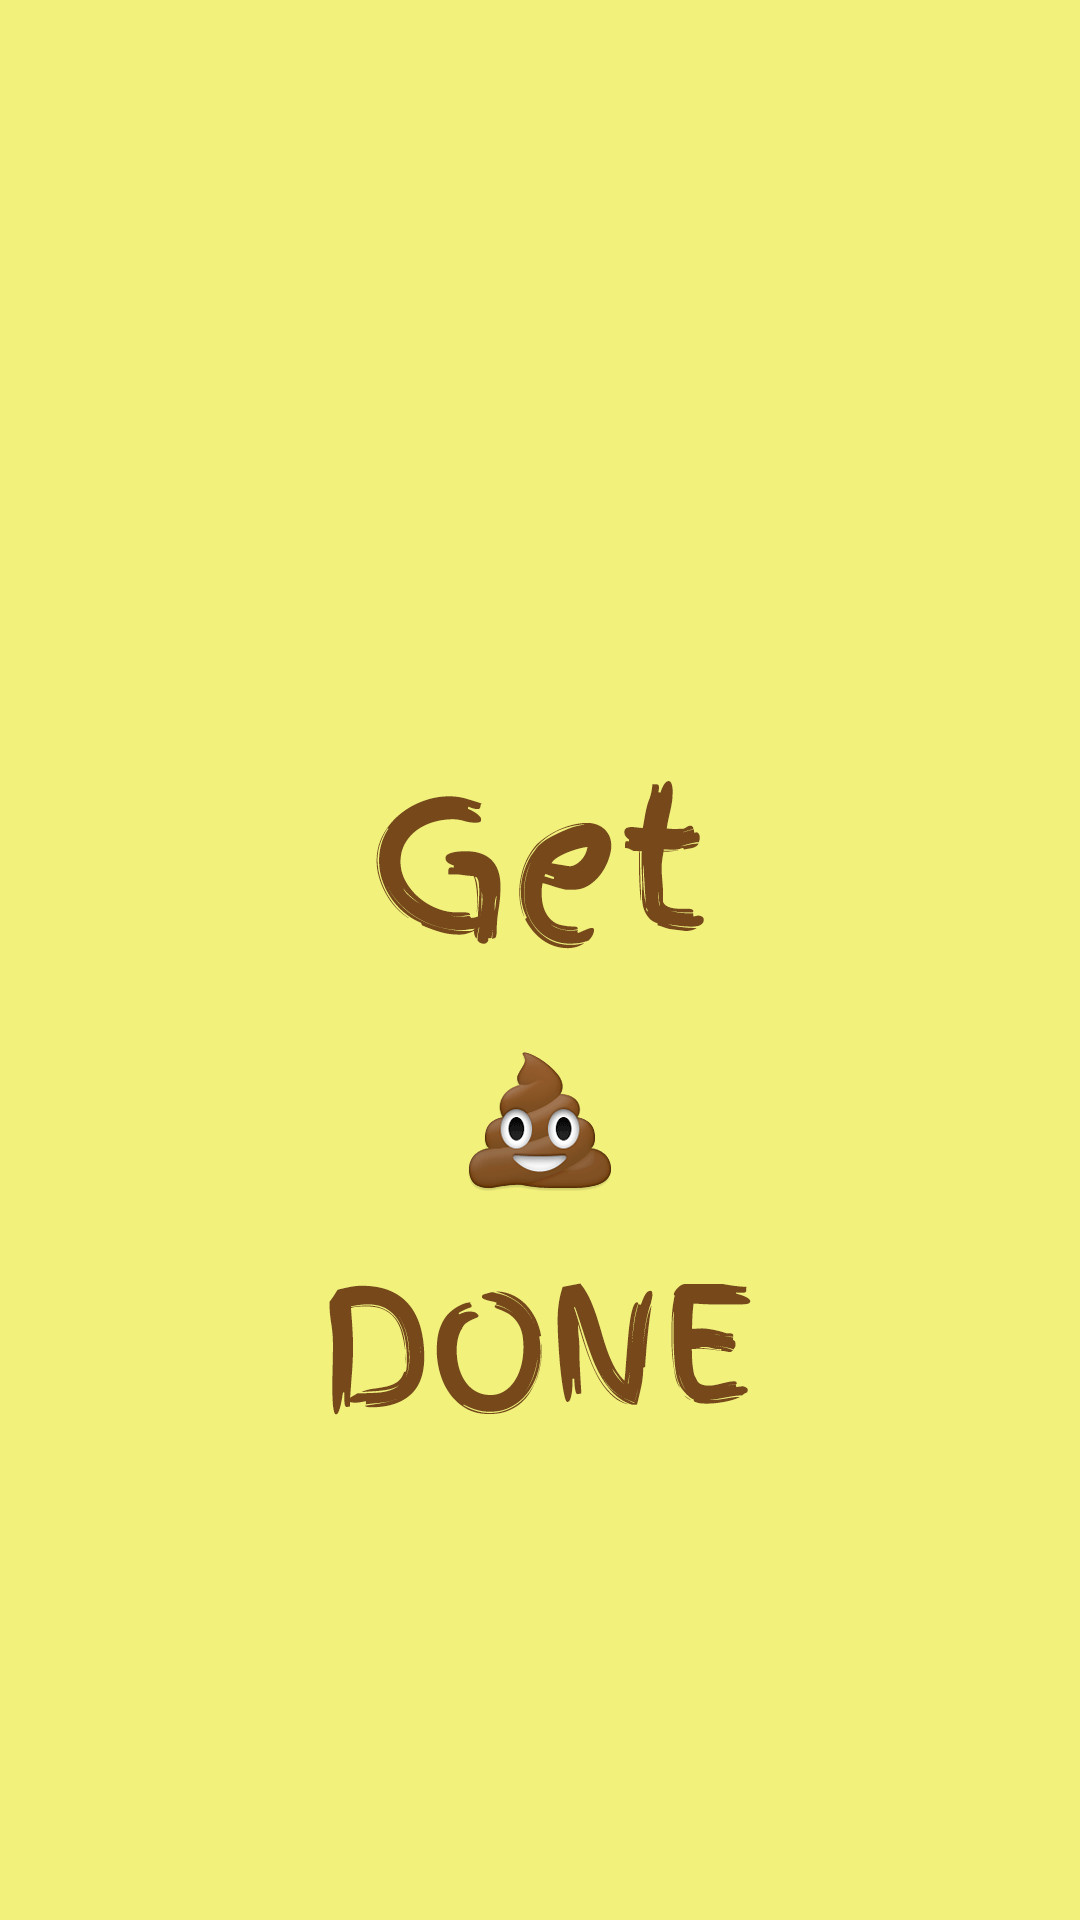 1080x1920 Get Shit Done iPhone 6 Plus HD Wallpaper - http://freebestpicture.com